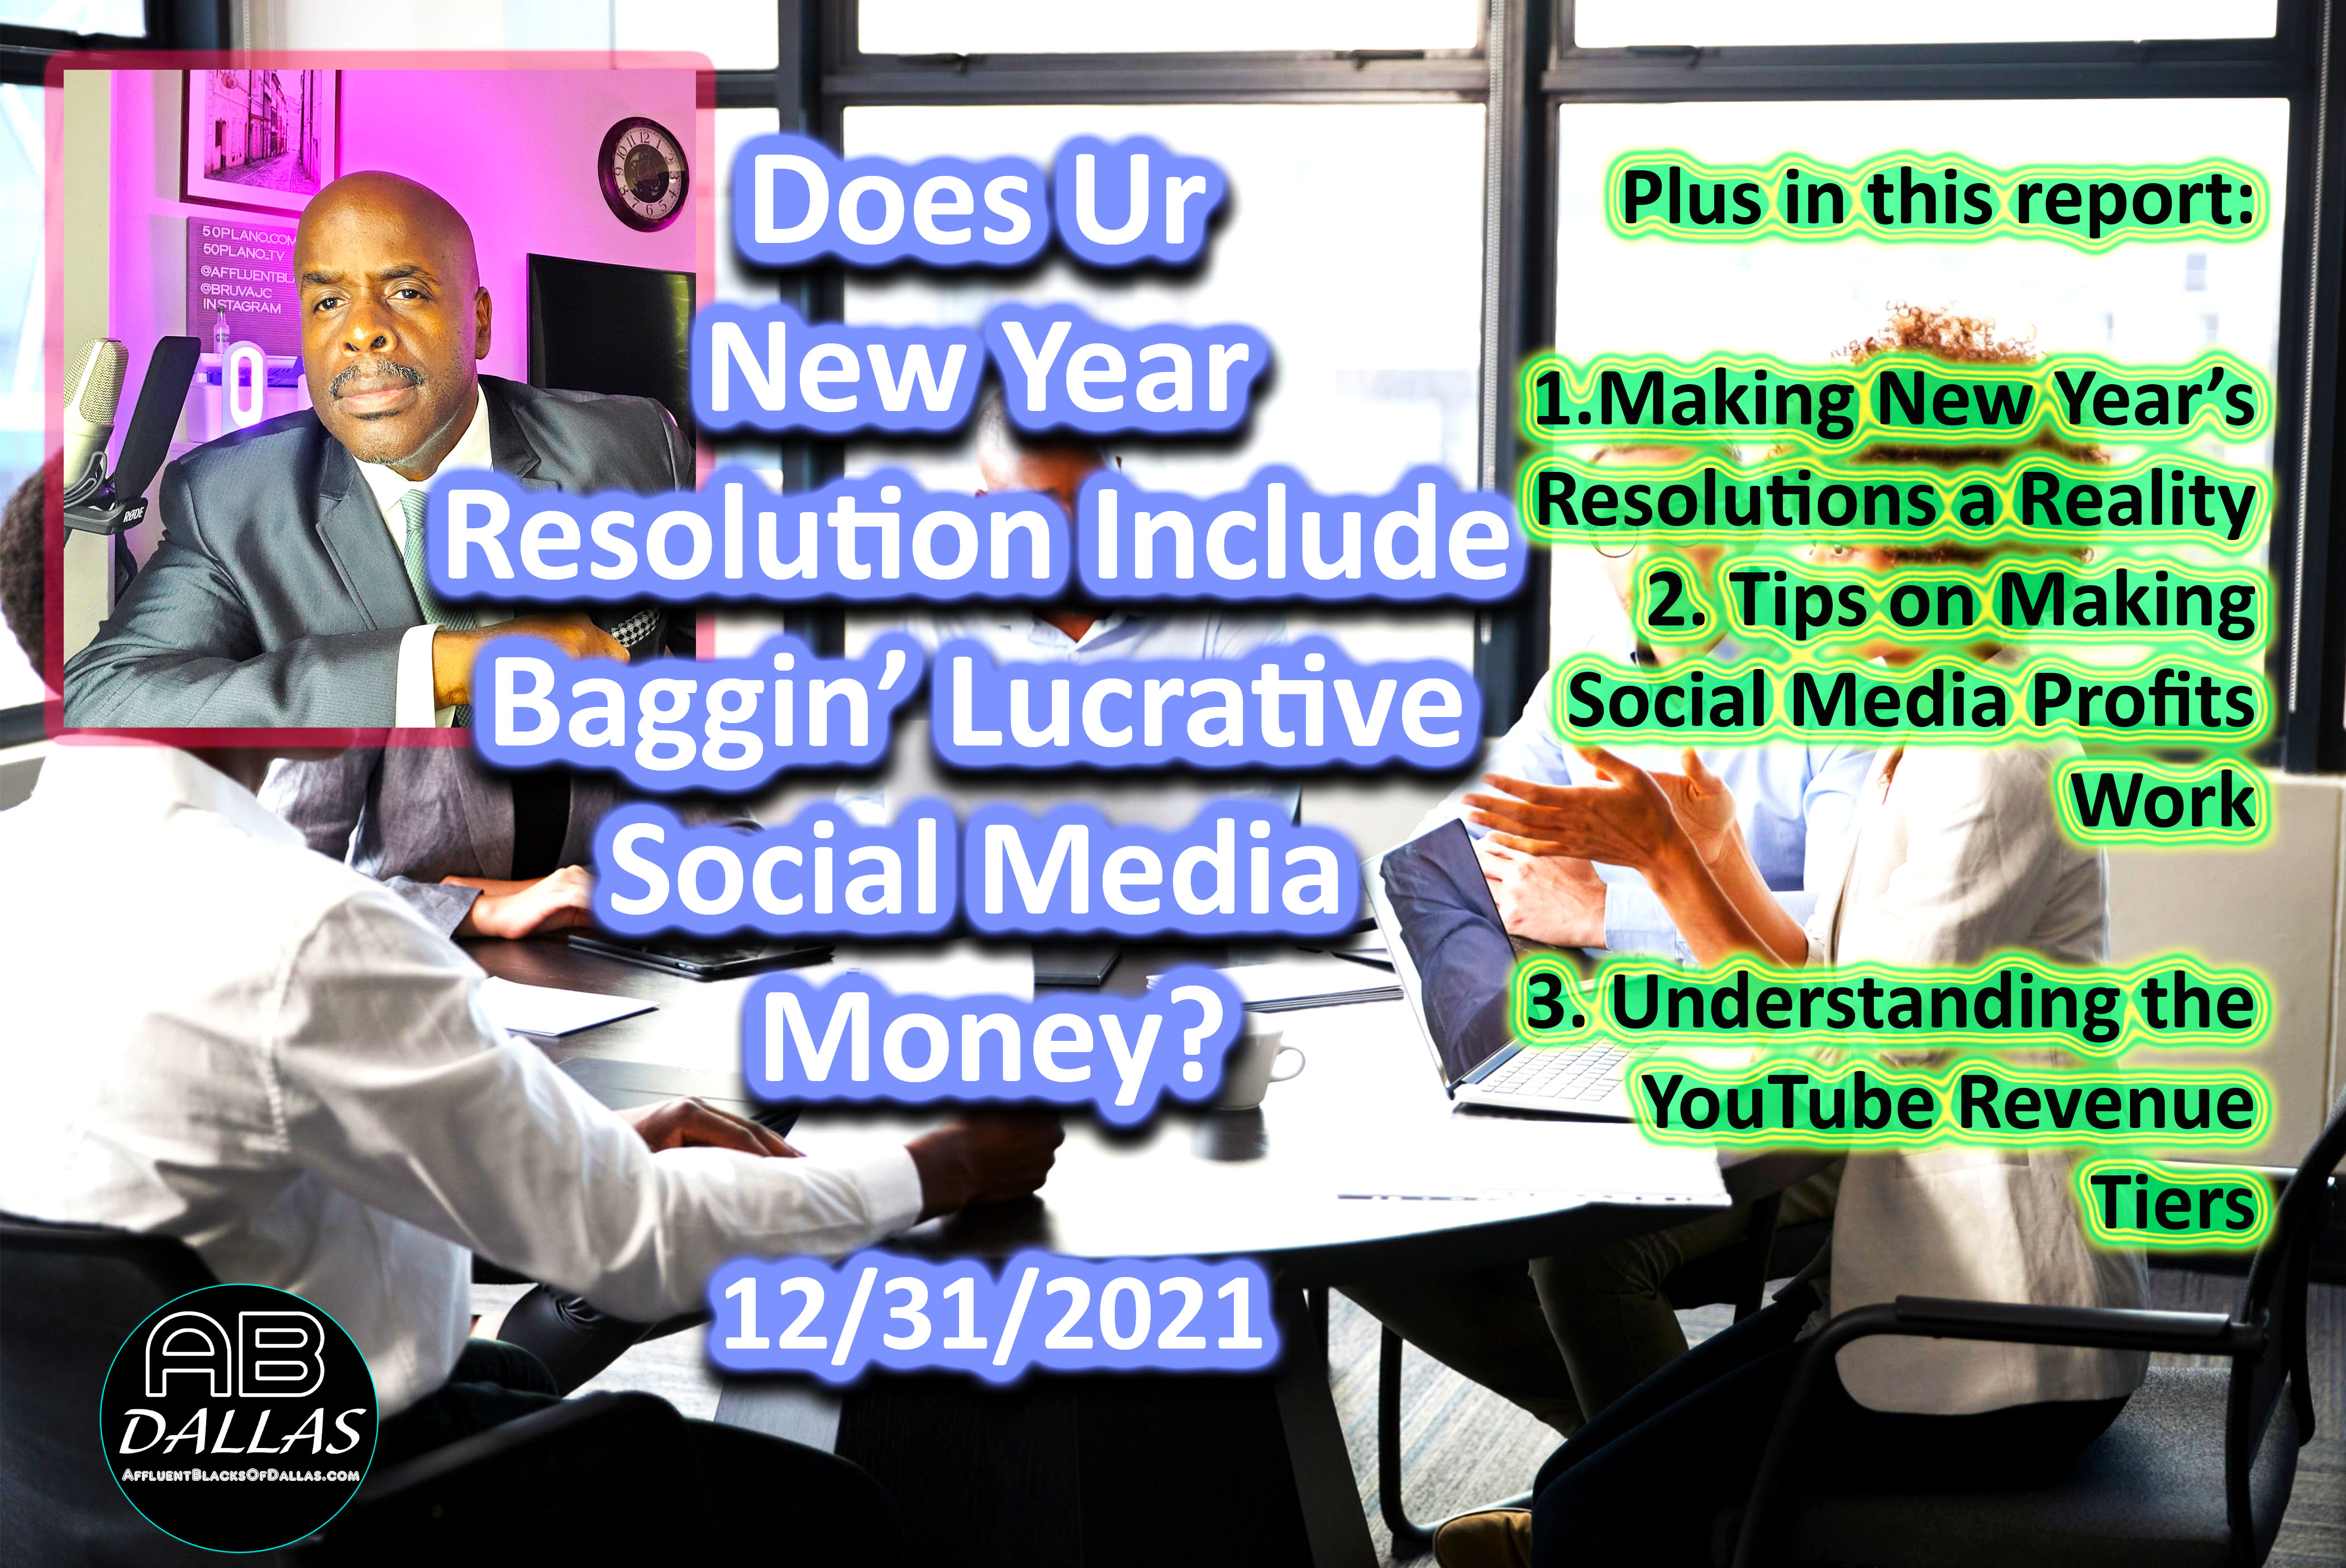 Does Your New Year Resolution Include Baggin’ Lucrative Social Media Money?